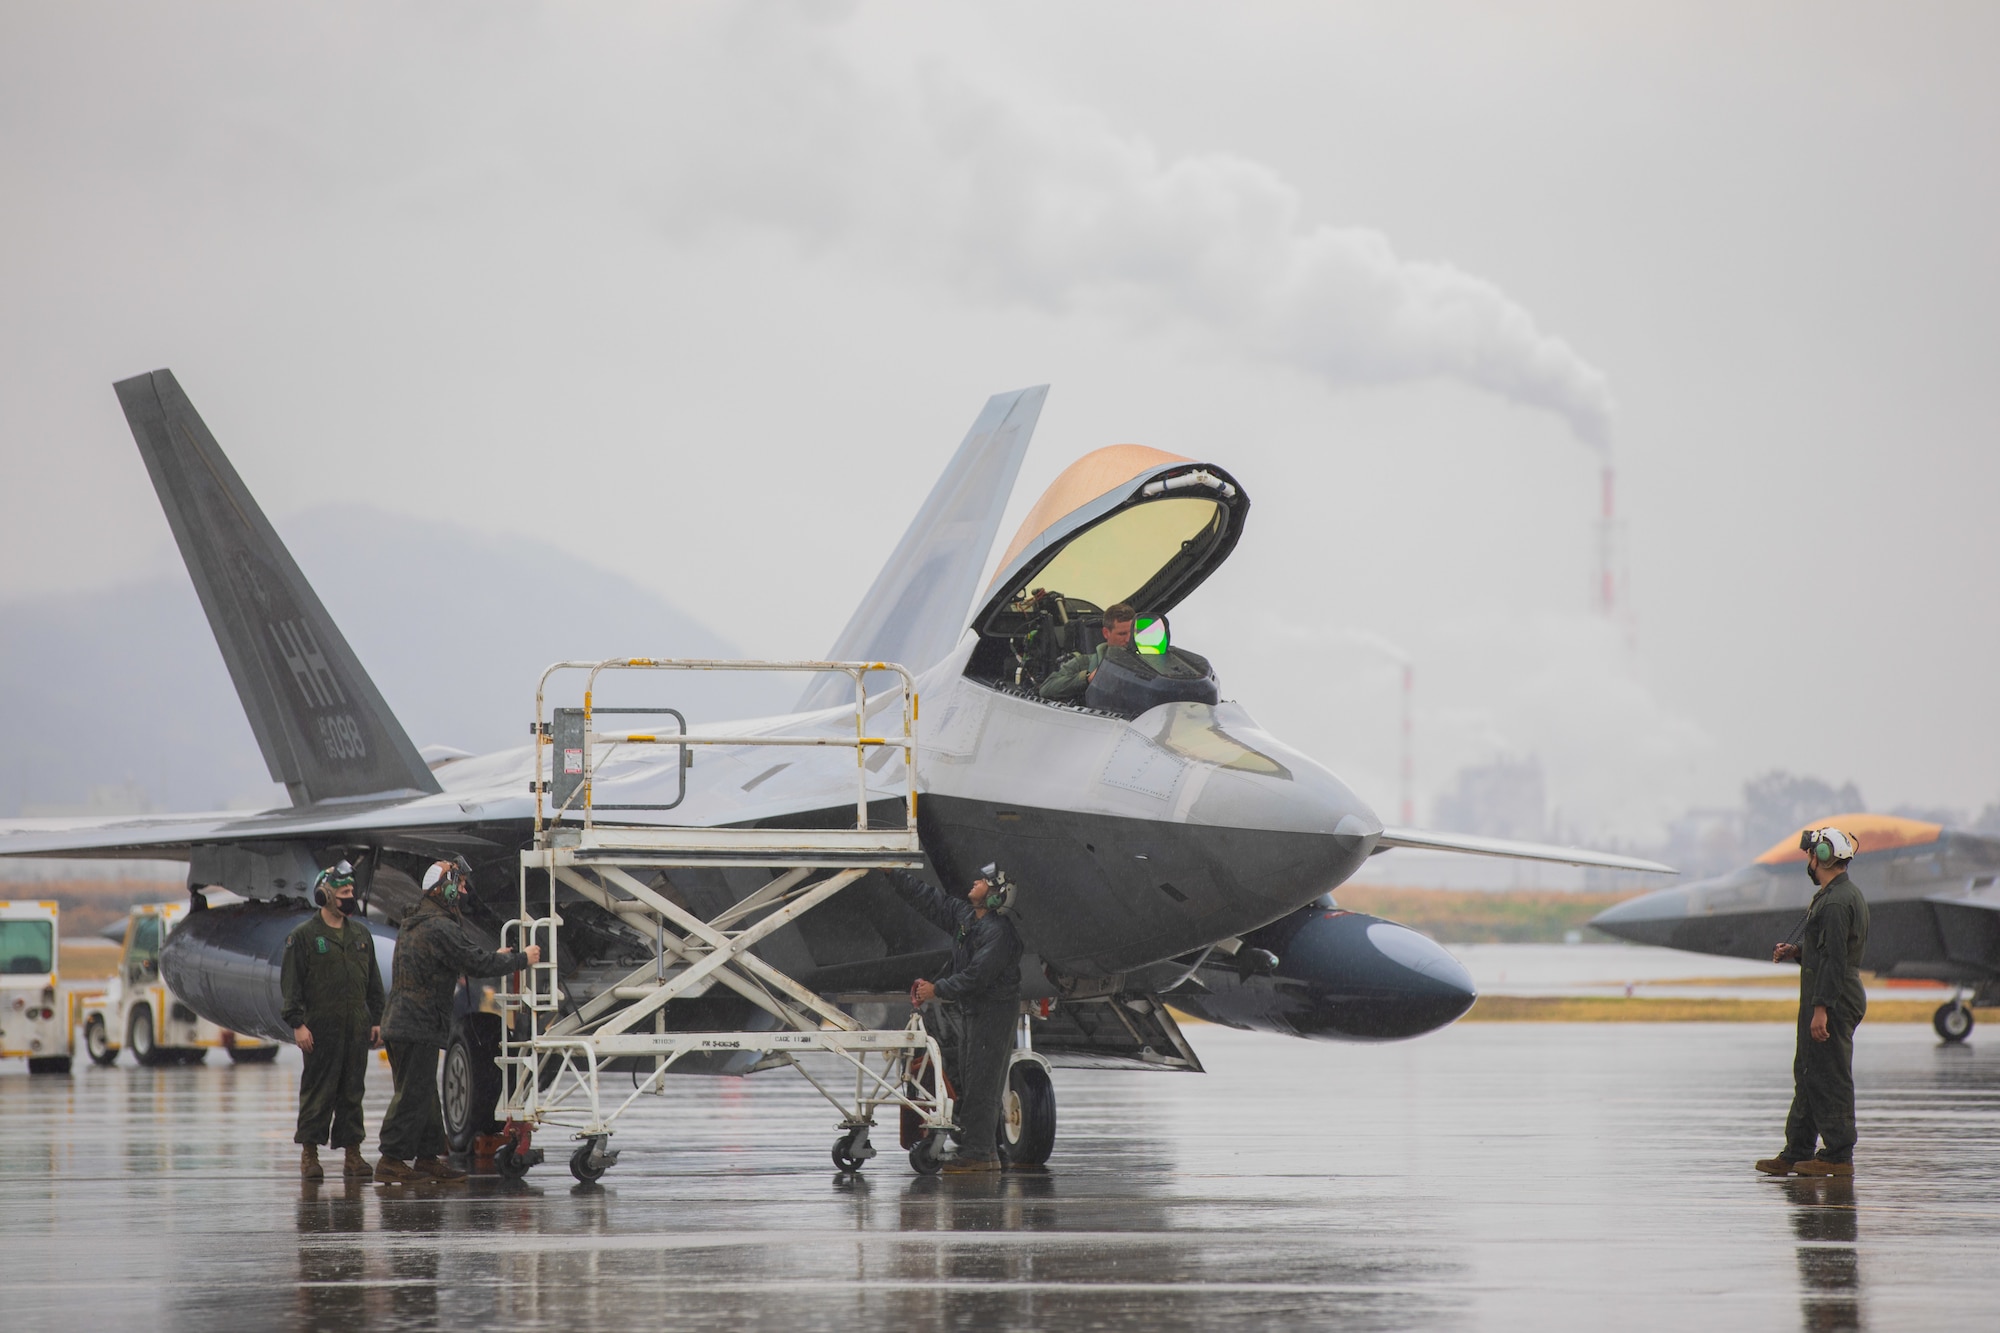 A U.S. Air Force F-22 Raptor with the 199th Fighter Squadron sits on the flight line at Marine Corps Air Station Iwakuni, Japan, March 12, 2021. Airmen with the 199th Fighter Squadron and the 19th Fighter Squadron, based out of Joint Base Pearl Harbor-Hickam, Hawaii, deployed to MCAS Iwakuni to conduct local area training with U.S. Marine Corps units. Pacific Air Forces’ fighters stand ready to support the global strategic environment as it continues to demand flexibility and freedom of action. The Dynamic Force Employment concept will change the way the Department of Defense uses the joint force with its focus on strategic predictability and operational unpredictability. (U.S. Marine Corps photo by Lance Cpl. Triton Lai)